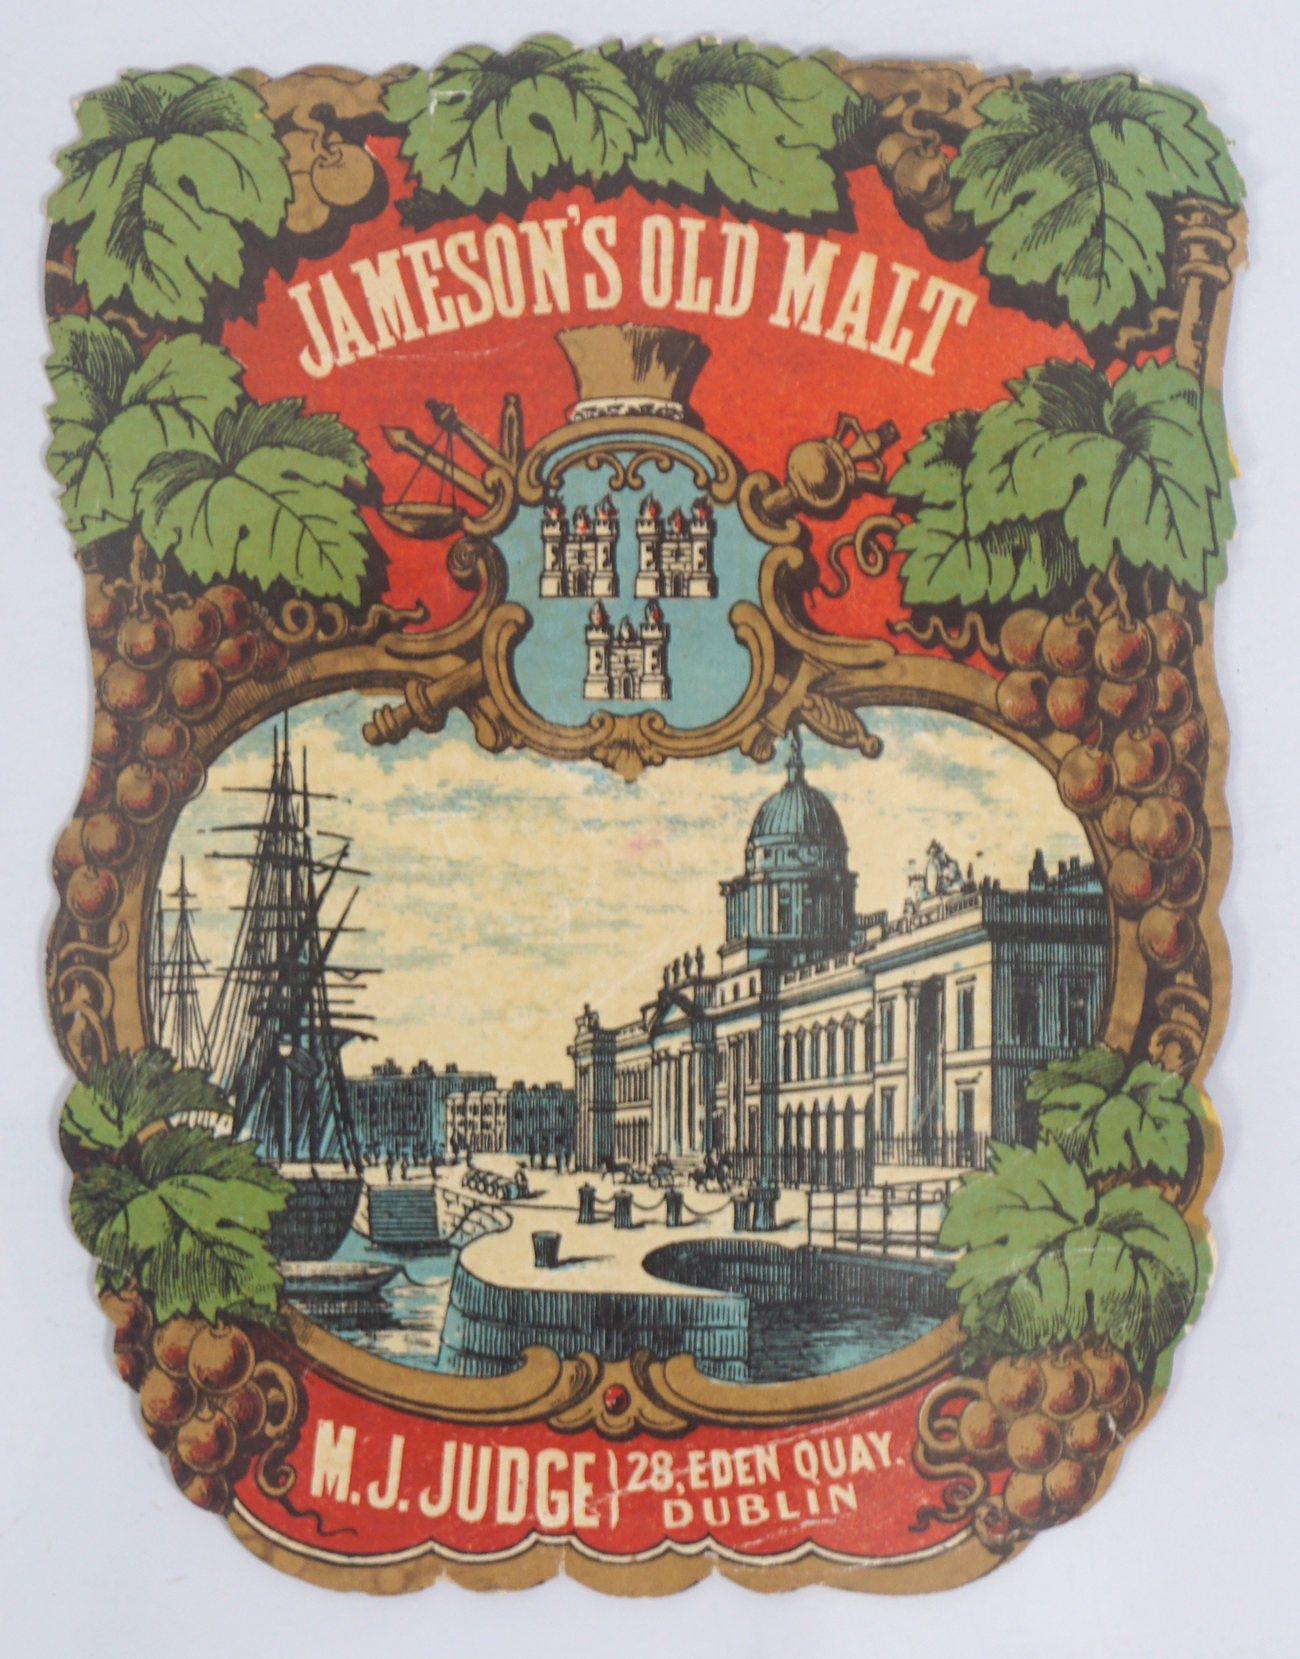 RARE COLLECTION OF IRISH WHISKEY LABELS - Image 10 of 16